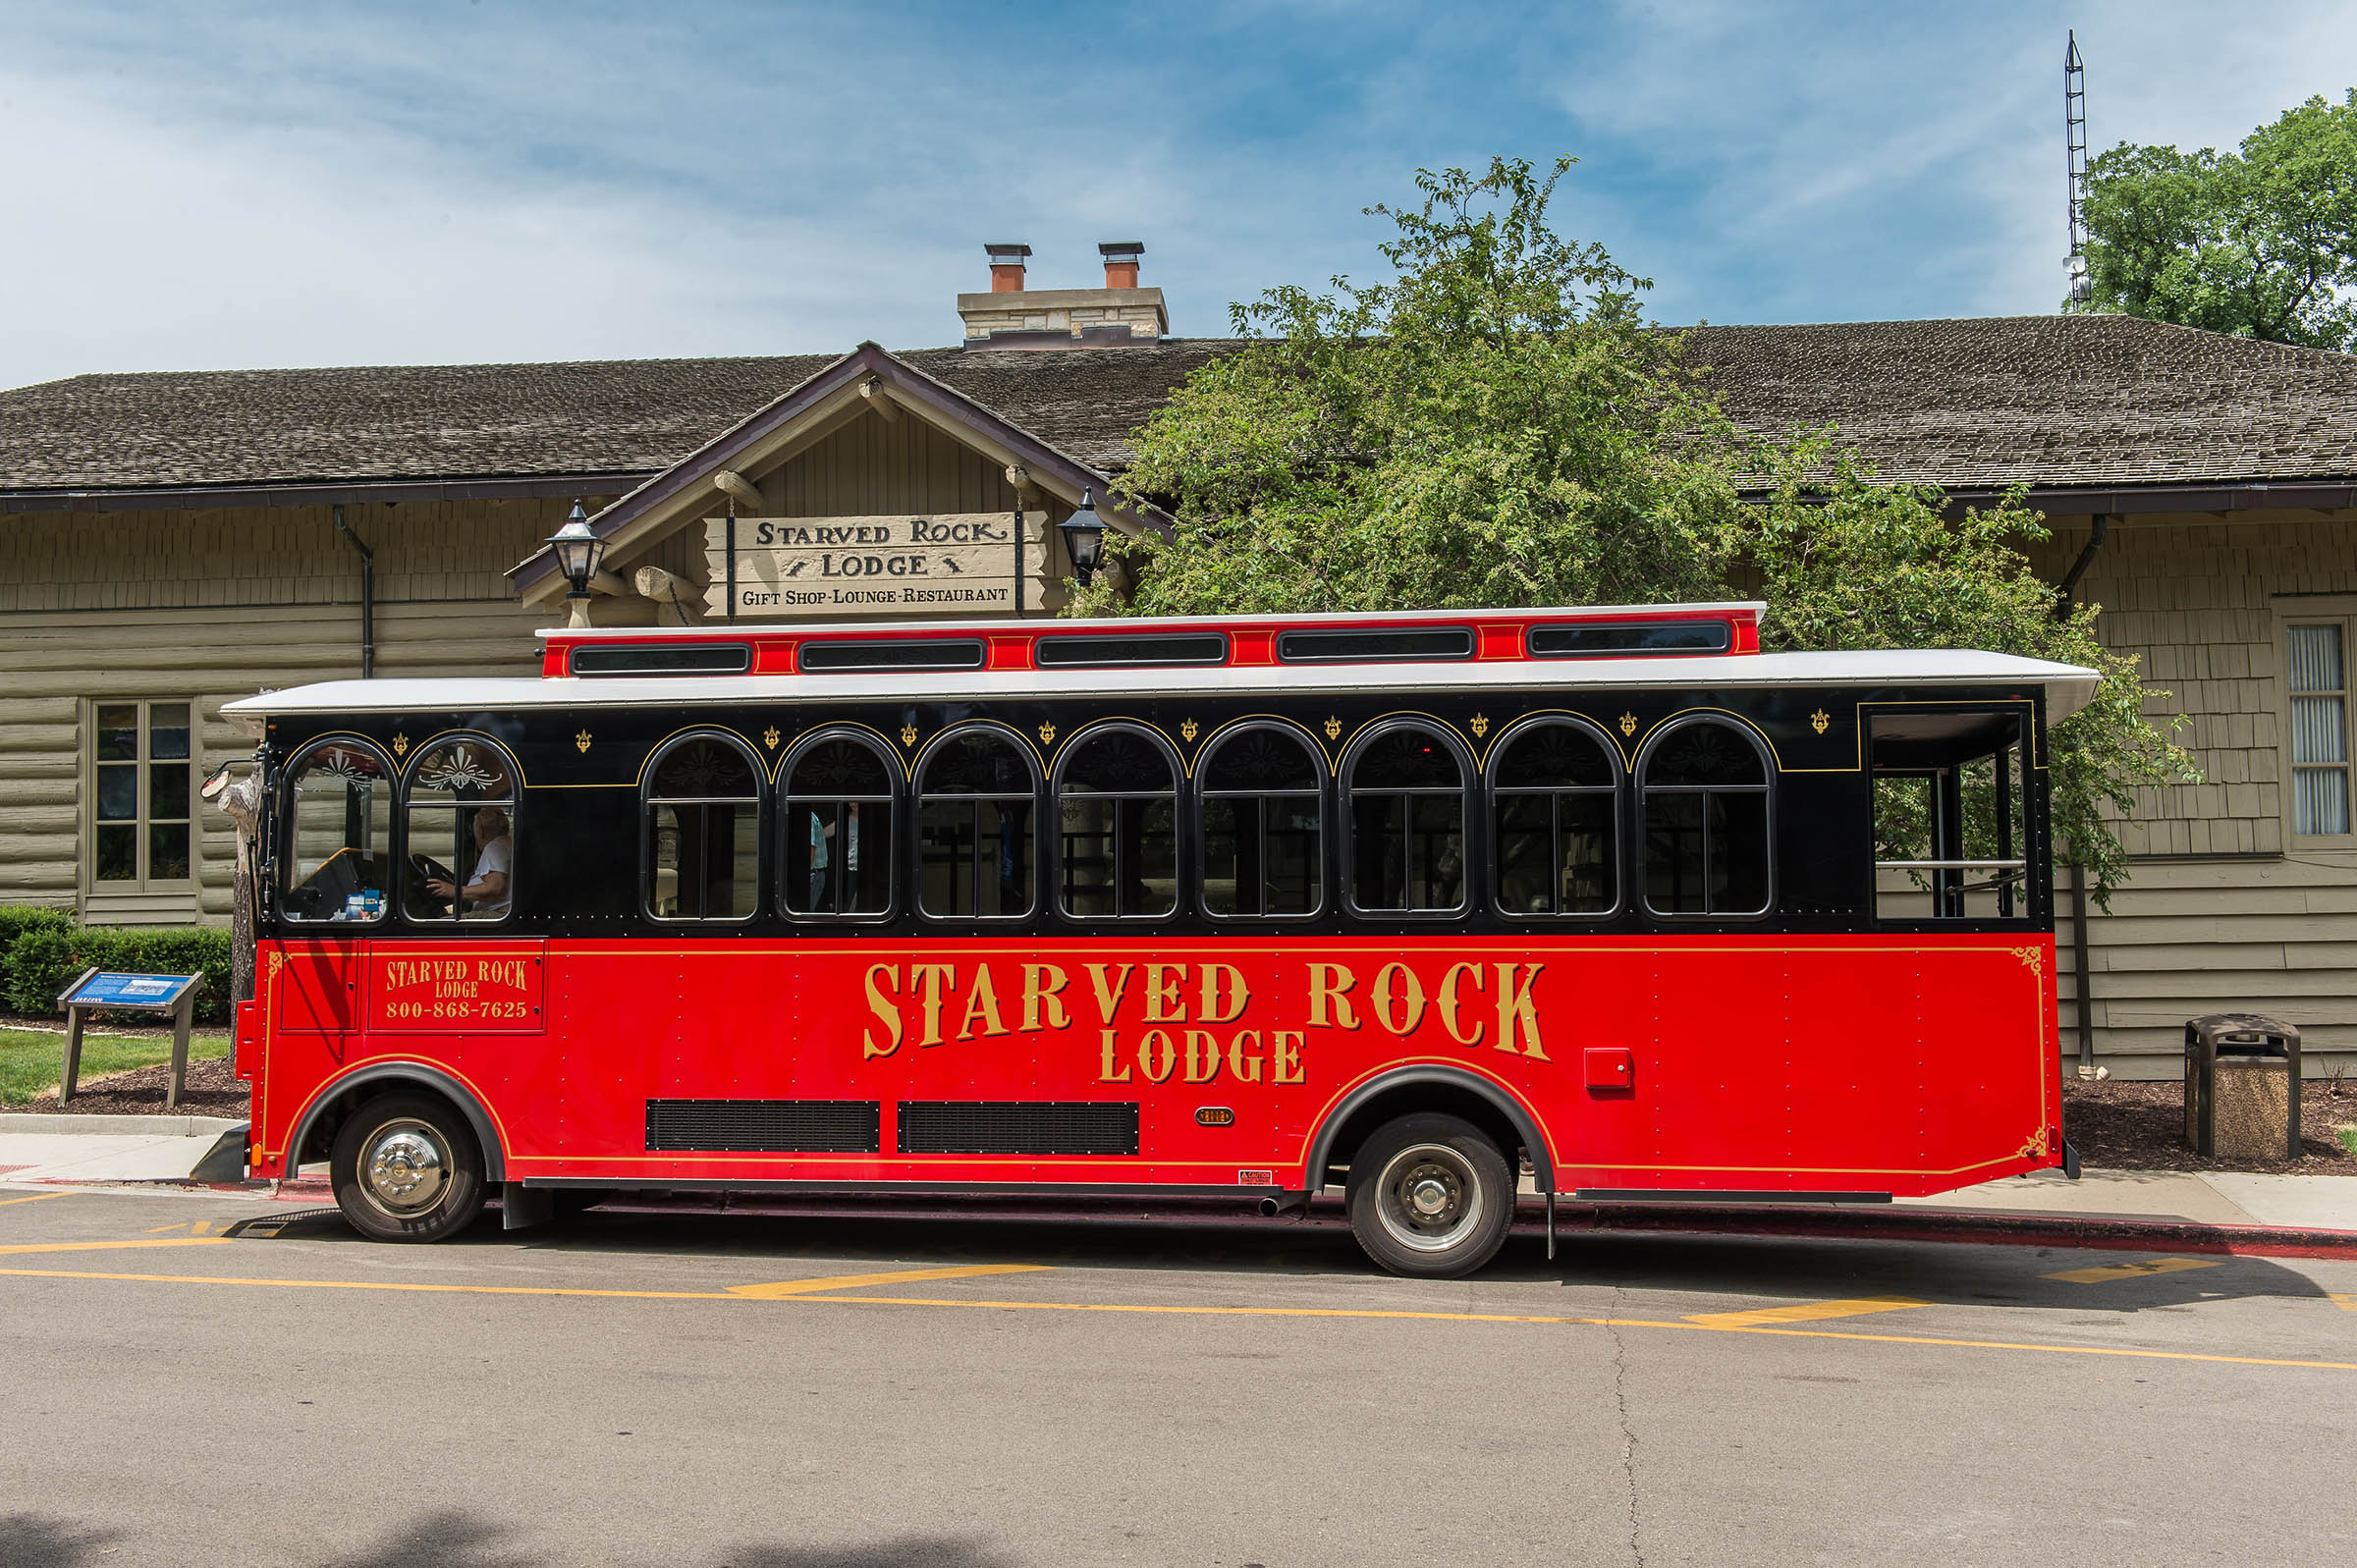 Red Trolley on streets of starved rock area